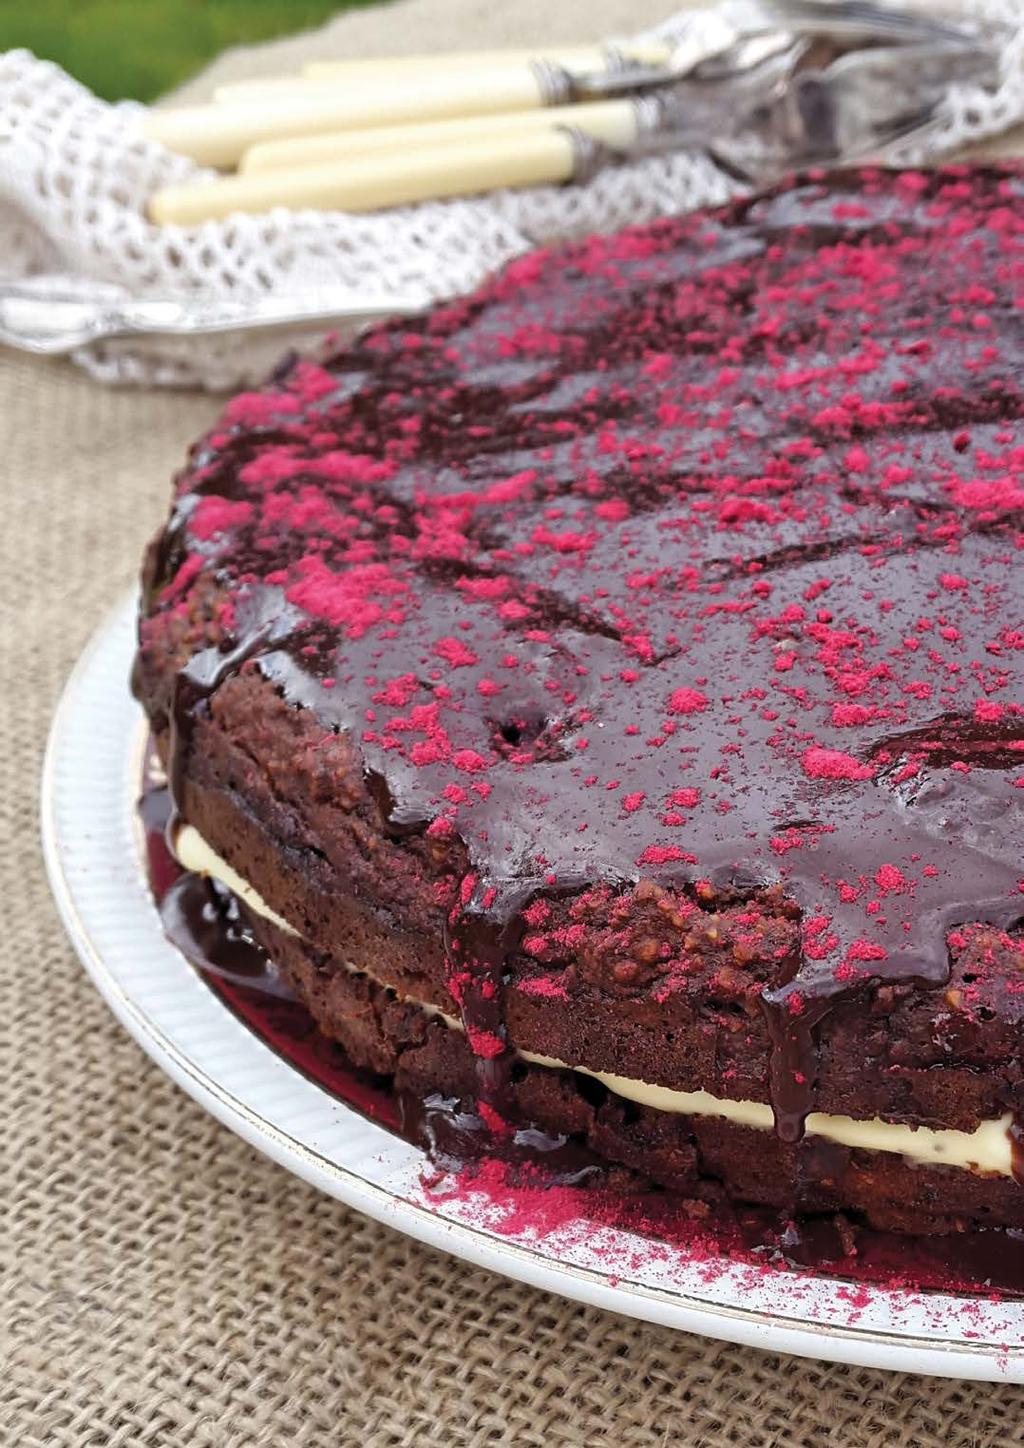 RASPBERRY Chocolate & SERVES 12 Cake 1½ cups pitted dried dates, soaked in recently boiled water for 10 minutes and then drained and squeezed thoroughly ¼ cup coconut oil, melted 1 heaped tsp baking